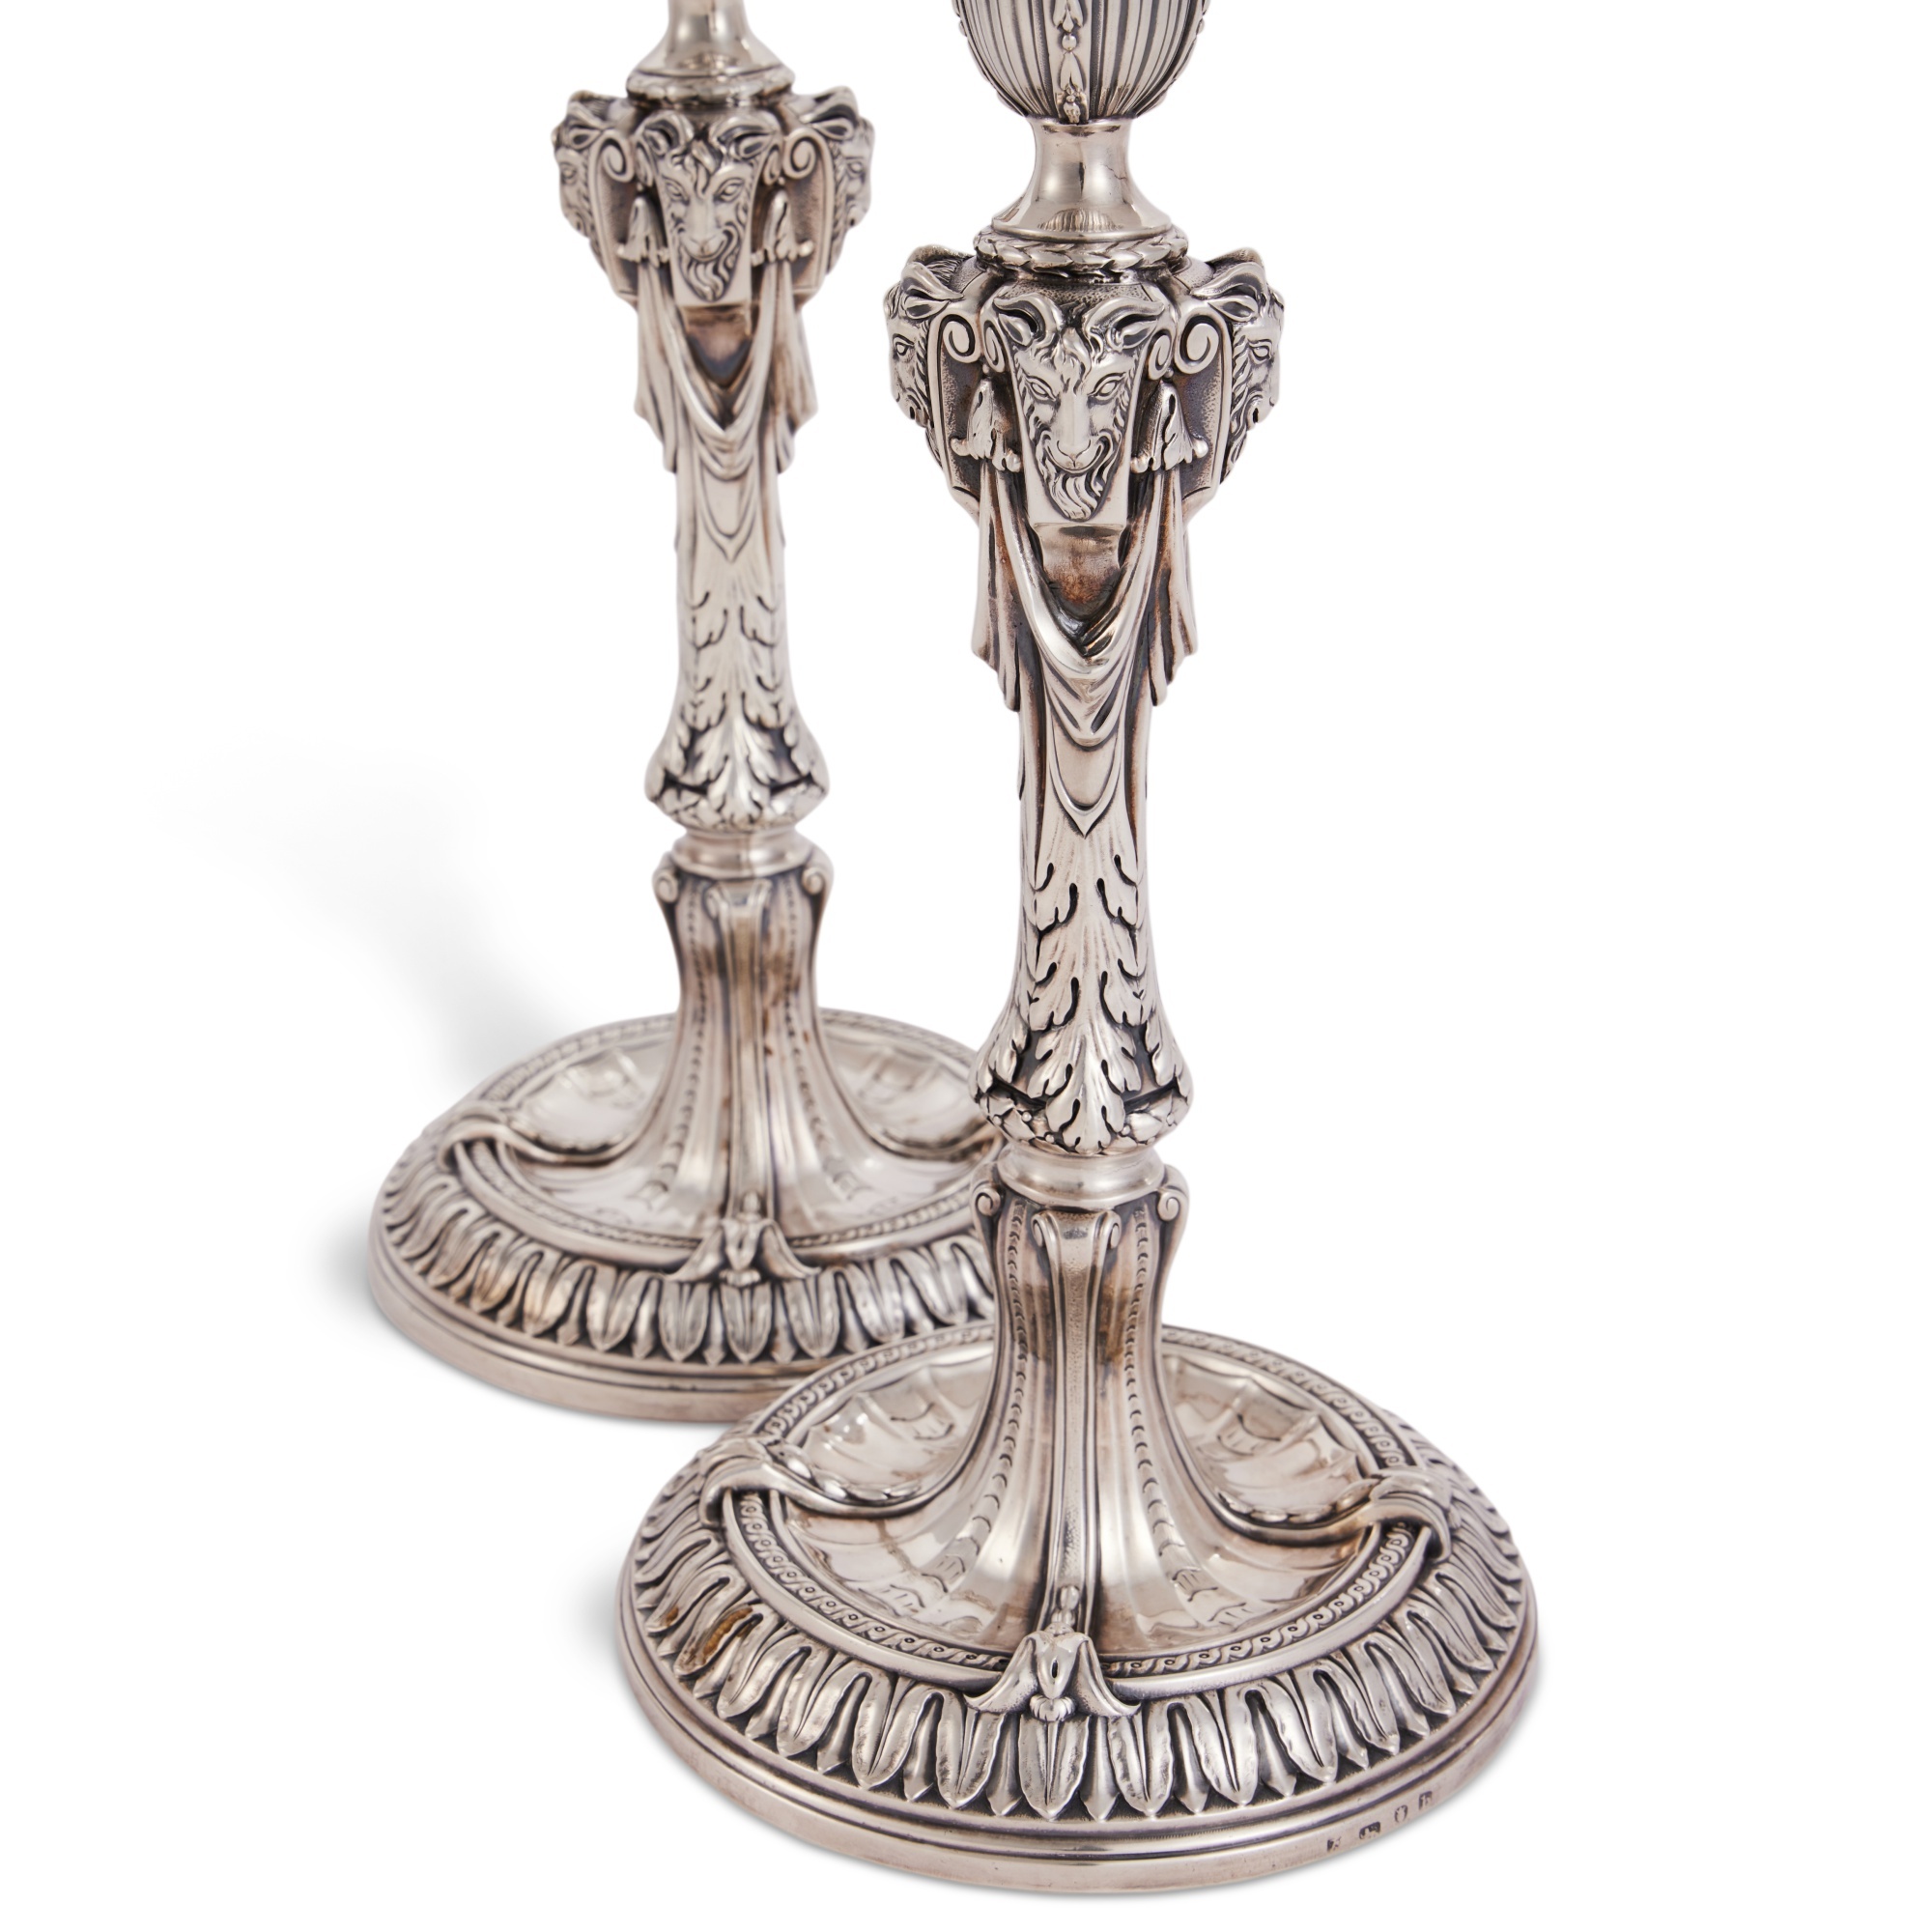 A Large Pair Of George III Silver Candlesticks, Frederick Kandler, London, 1777 - Image 4 of 6